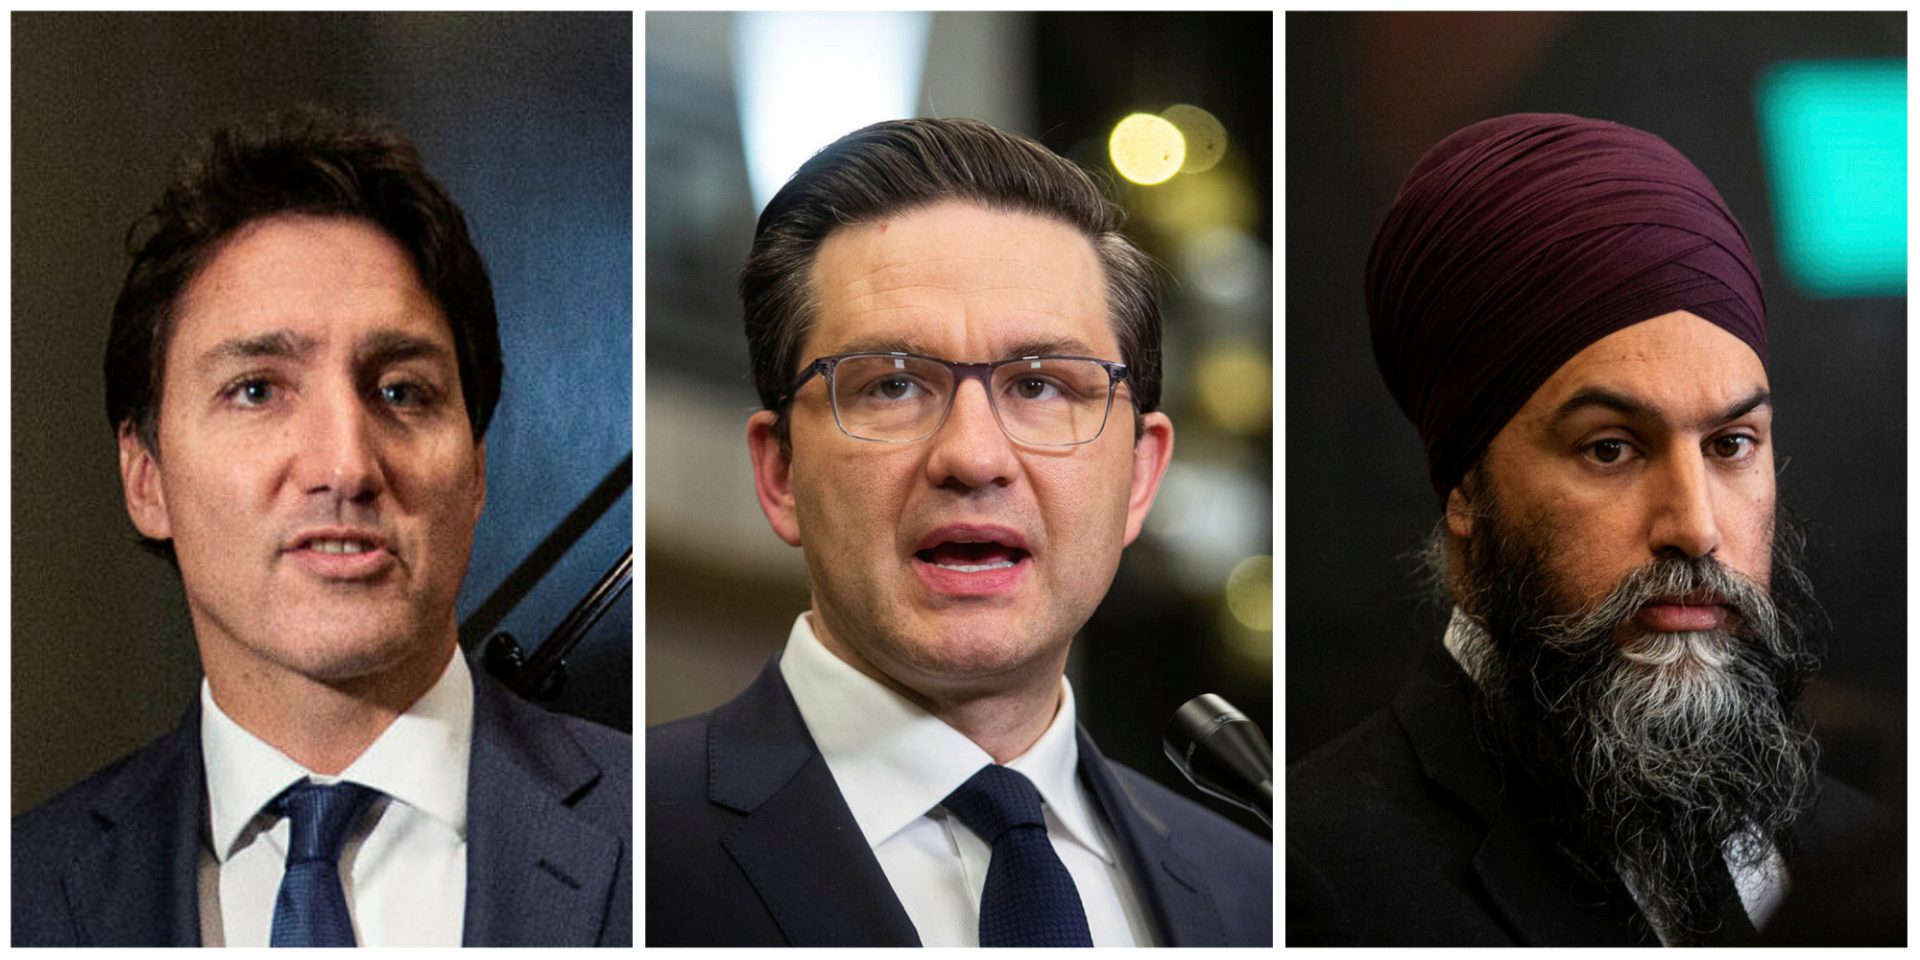 Canada's three largest political parties, headed by Liberal Leader Justin Trudeau, left, Conservative Leader Pierre Poilievre, and NDP Leader Jagmeet Singh, have all filed petitions against a ruling by the B.C. privacy commissioner that would require federal parties to comply with B.C.'s privacy laws when operating in that province. The Hill Times photographs by Andrew Meade